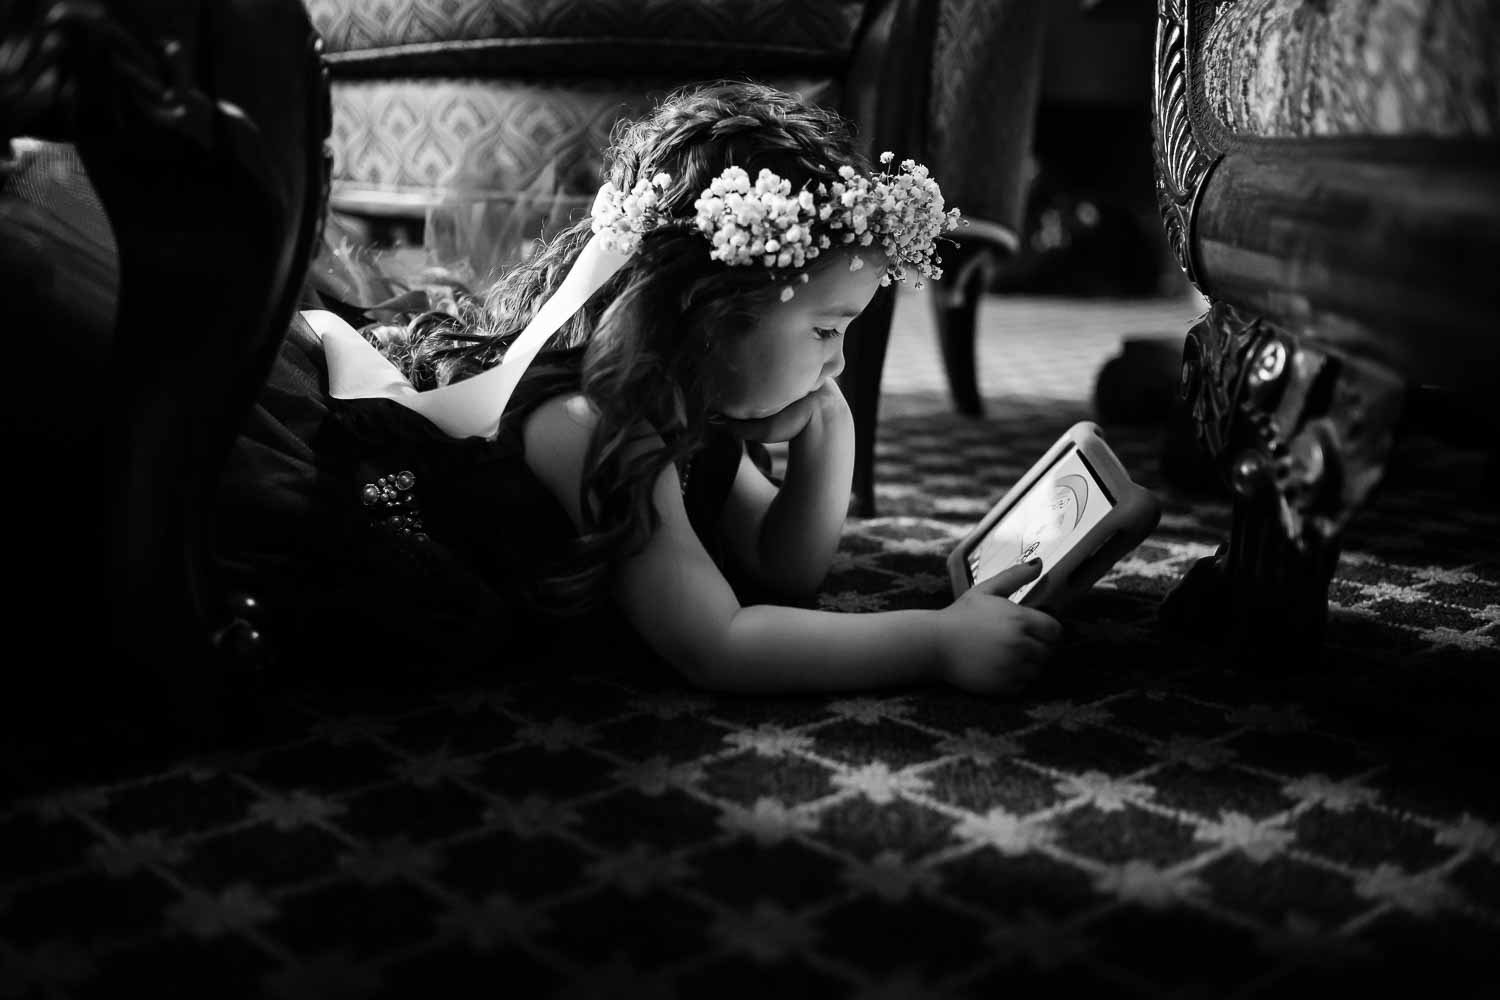 A flower girl dressed up relaxes by watching a movie on a ipad at the Menger Hotel Wedding Ceremony San Antonio Reception Grand BallroomSan Antonio -Leica photographer-Philip Thomas Photography